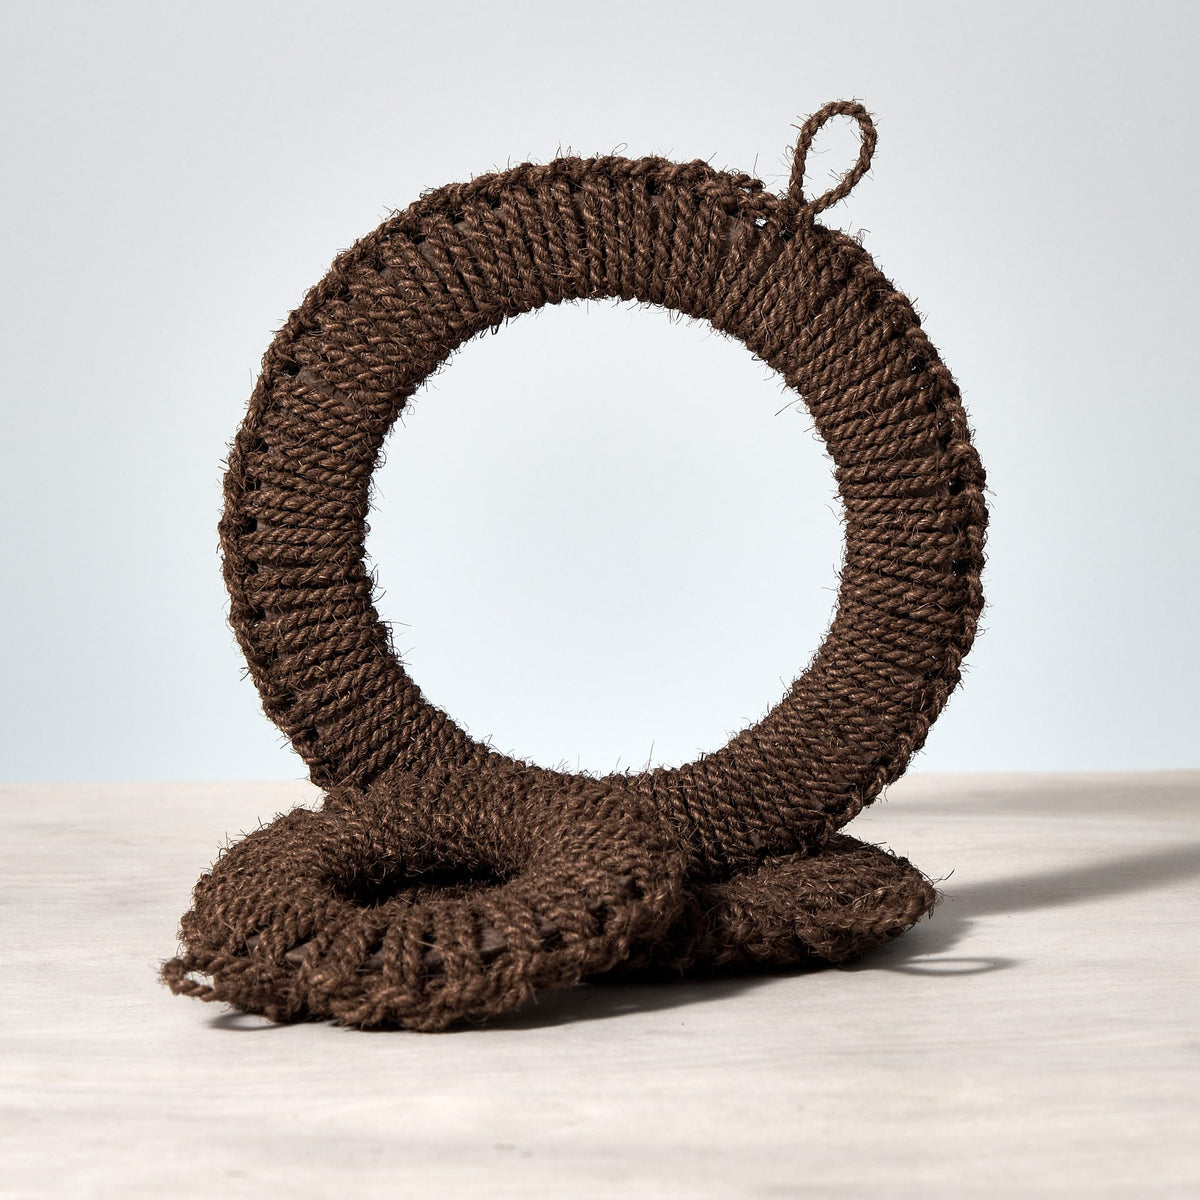 A Hand-Knit Trivet – Small by Takada on top of a wooden table.